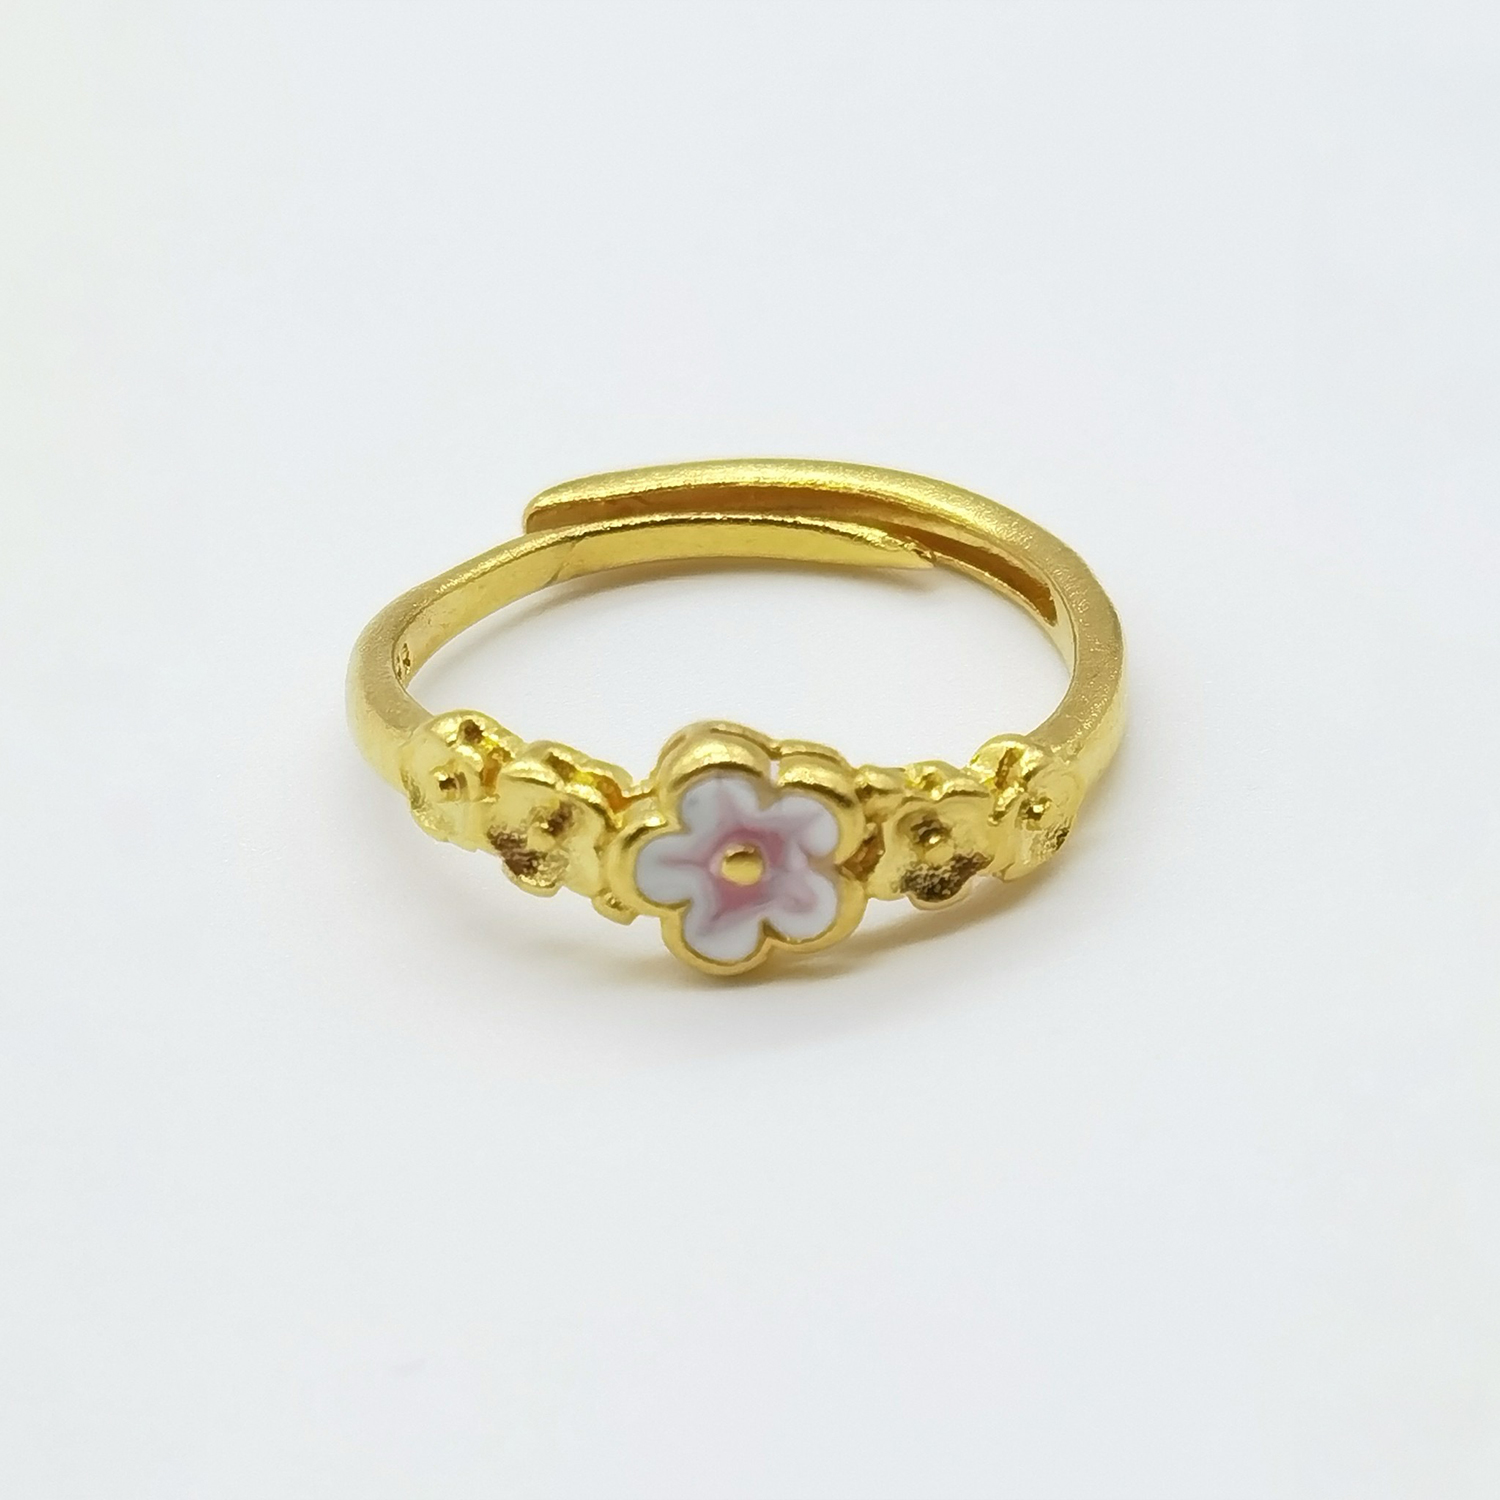 Alluvial gold vacuum electroplating 24K gold burning peach blossom ring